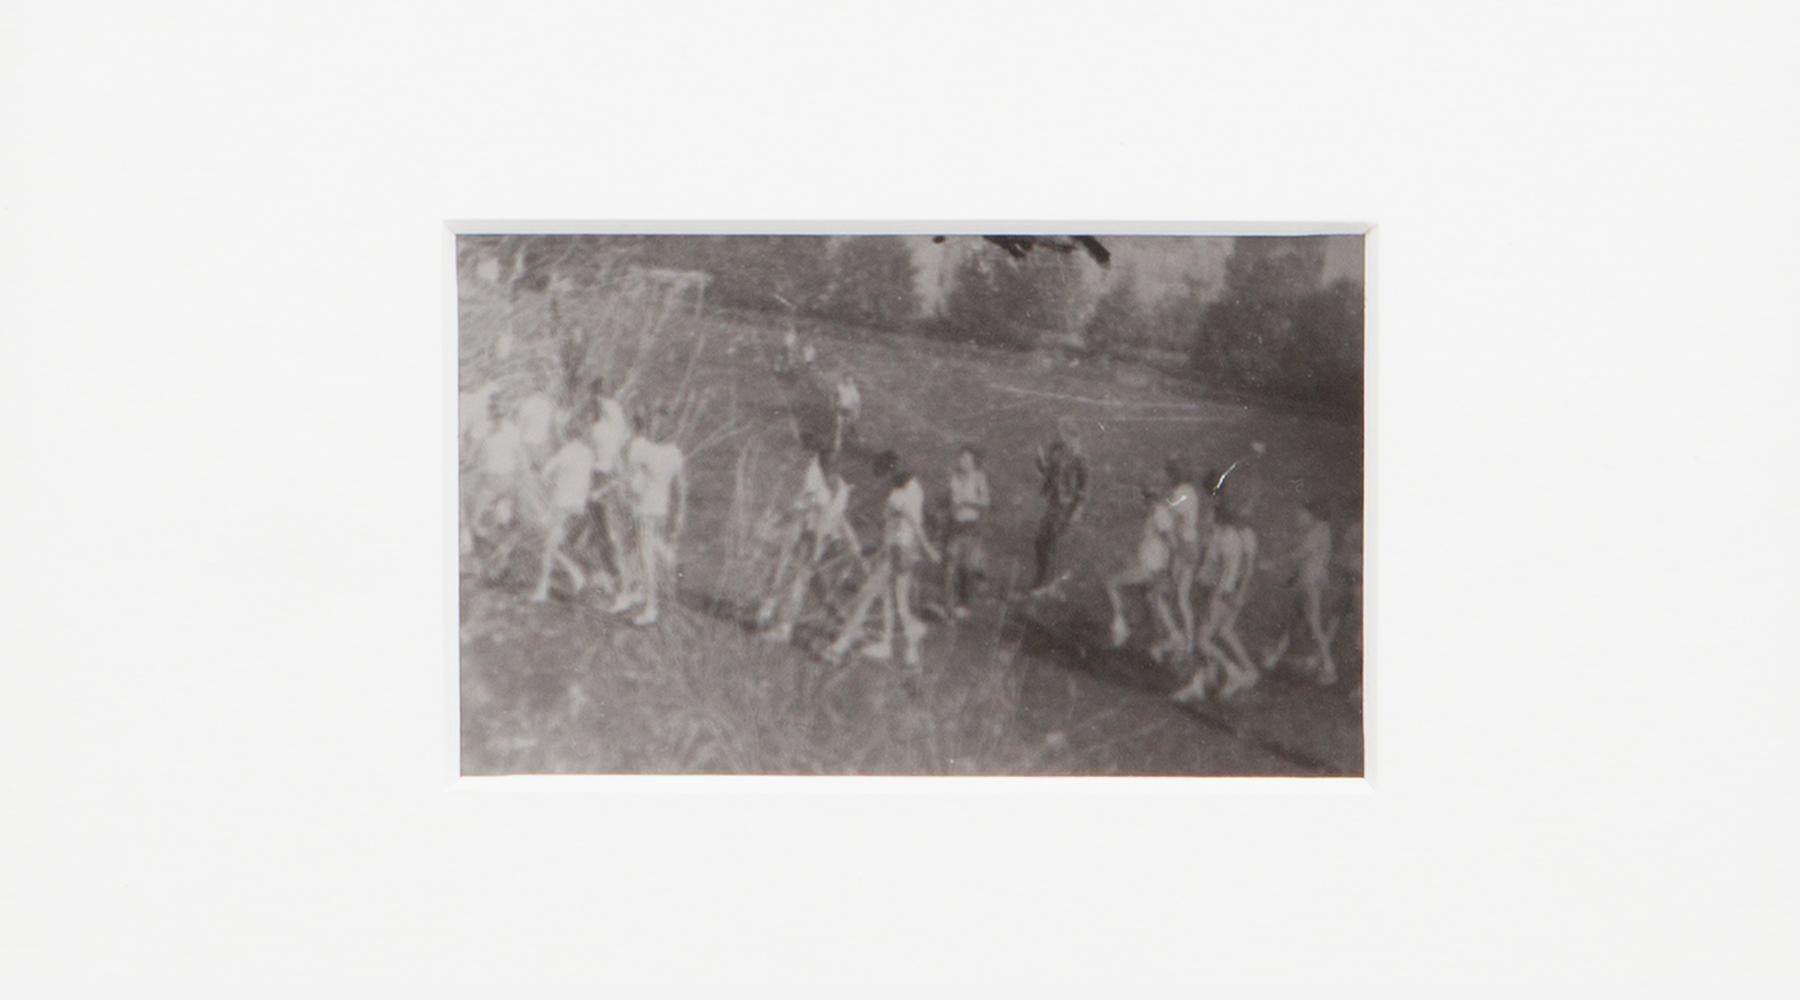 Original Miroslav Tichý b/w photography from 1970. Unique vintage gelatin silver print. Including black wooden frame in H 20.5 / W 25.5 cm. This motif describes women photographed during the gymnastics lesson in the park.

Miroslav Tichý was a